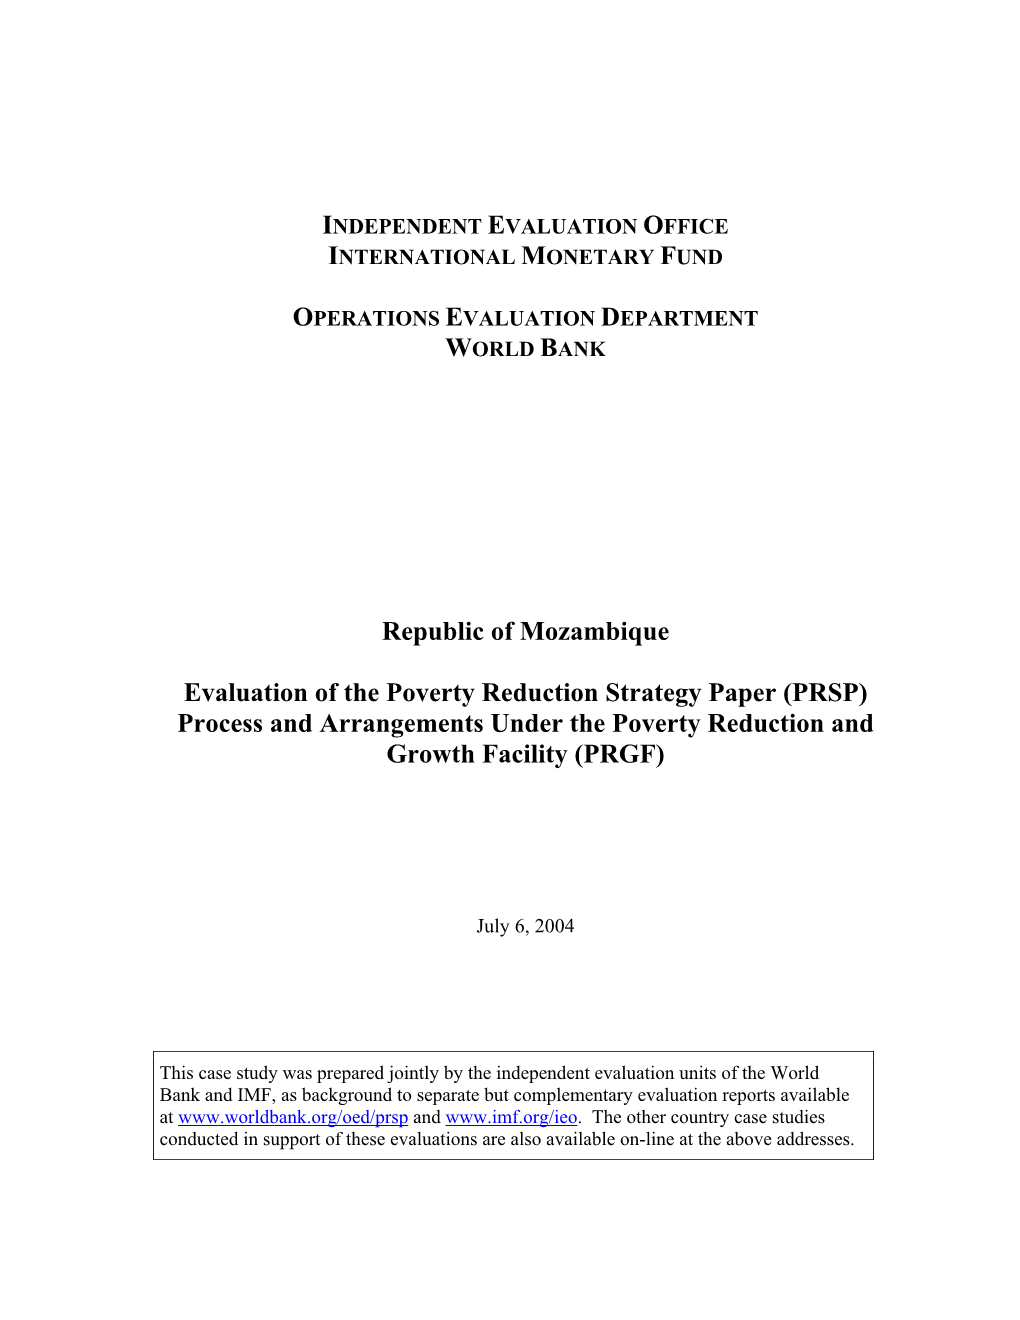 Republic of Mozambique Evaluation of the Poverty Reduction Strategy Paper